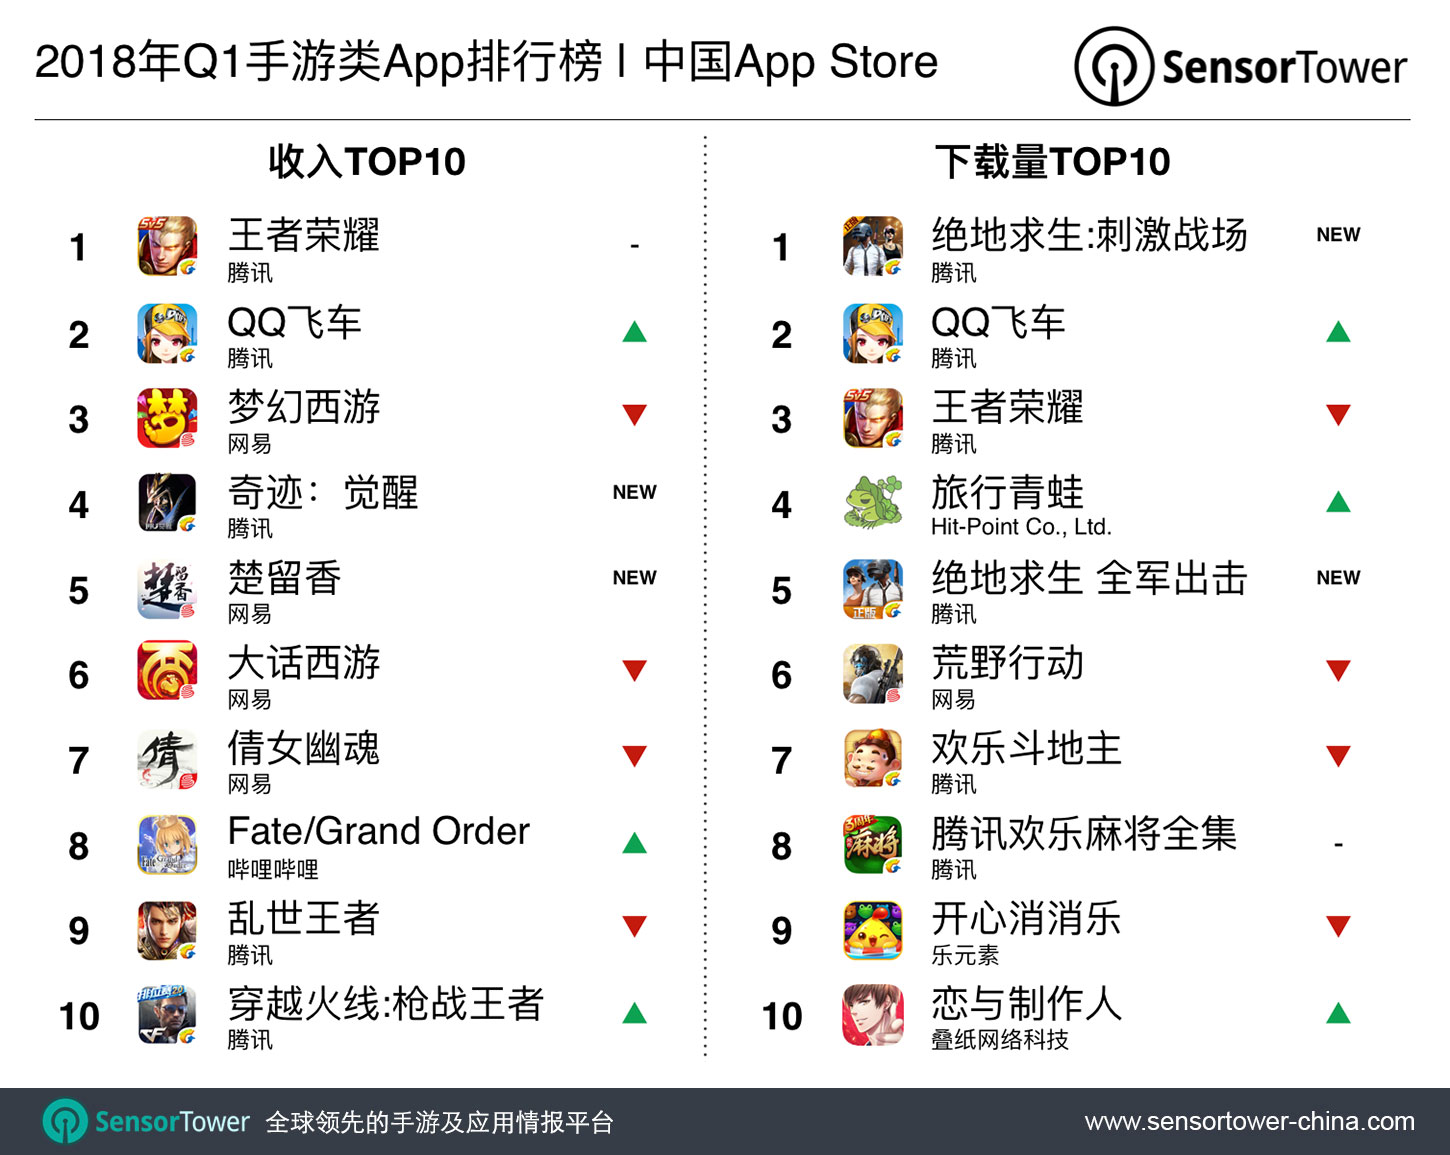 2018 Q1 CN iOS Top 10 Games by Revenue and Download